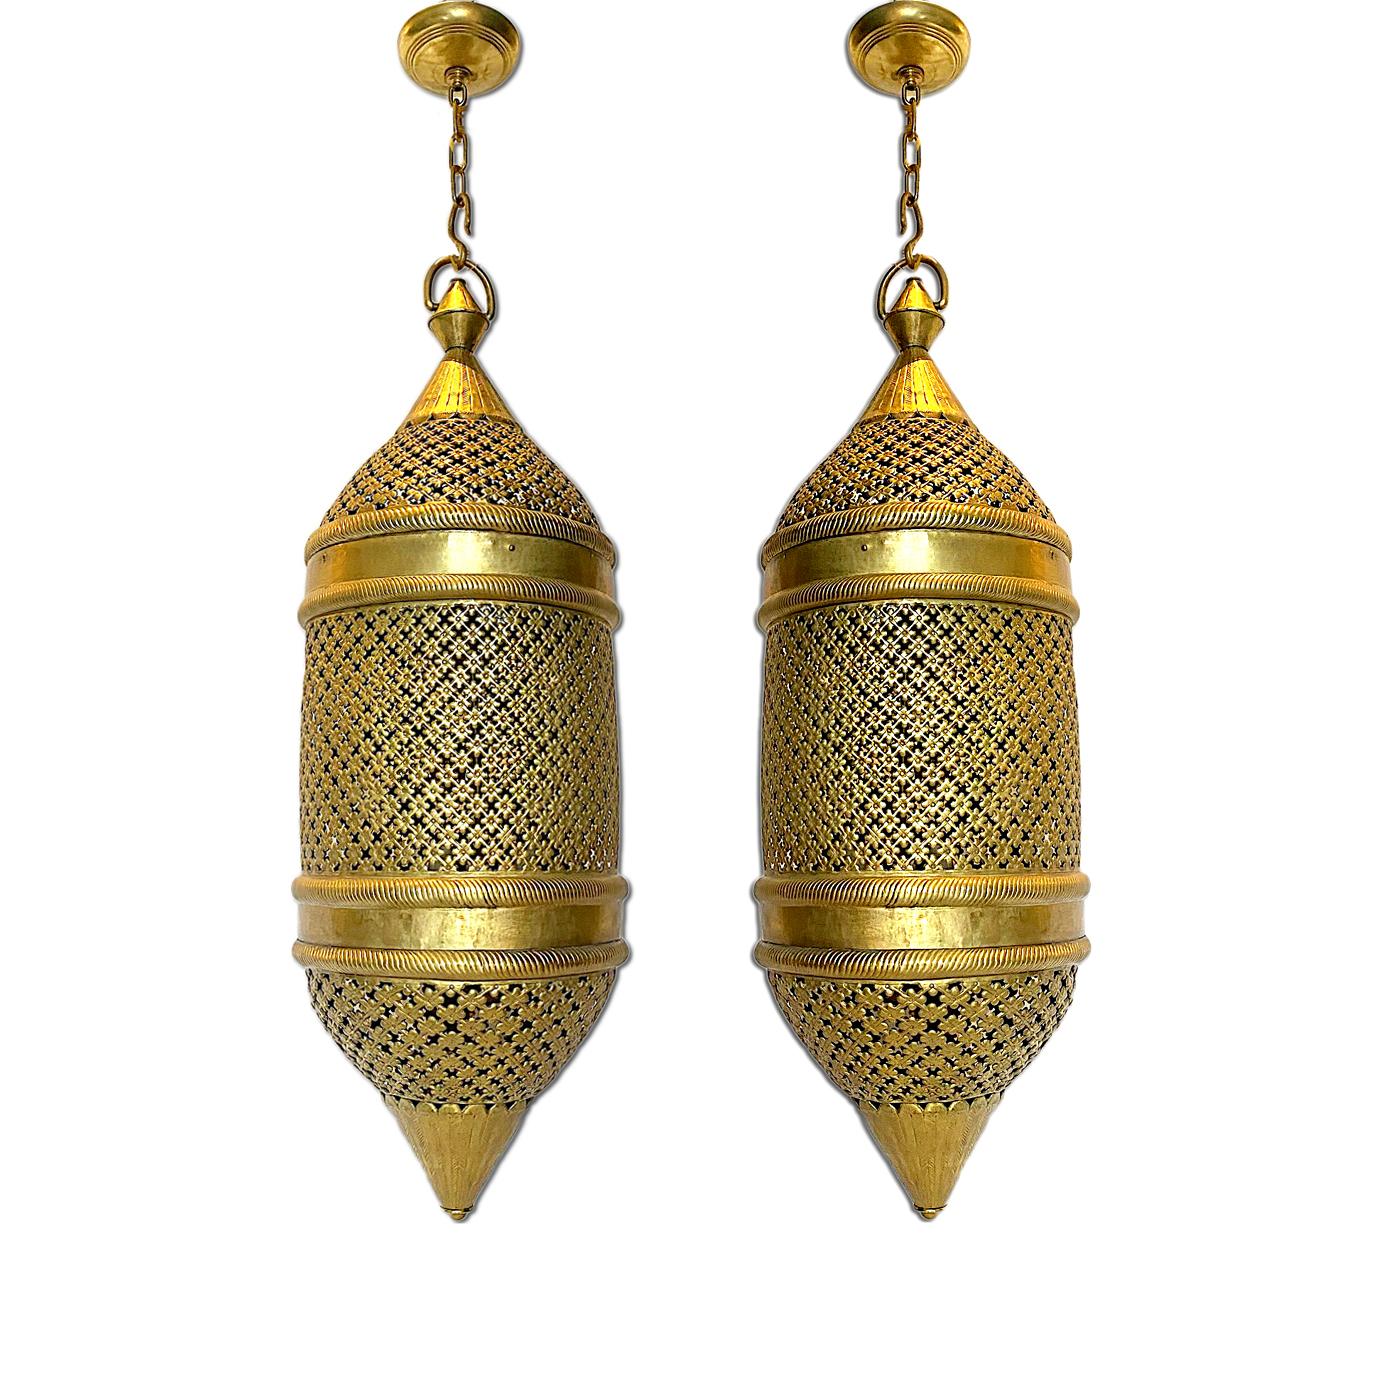 A pair of circa 1940s hammered and pierced lanterns with four interior lights each. 
Sold individually.

Measurements:
Drop: 46